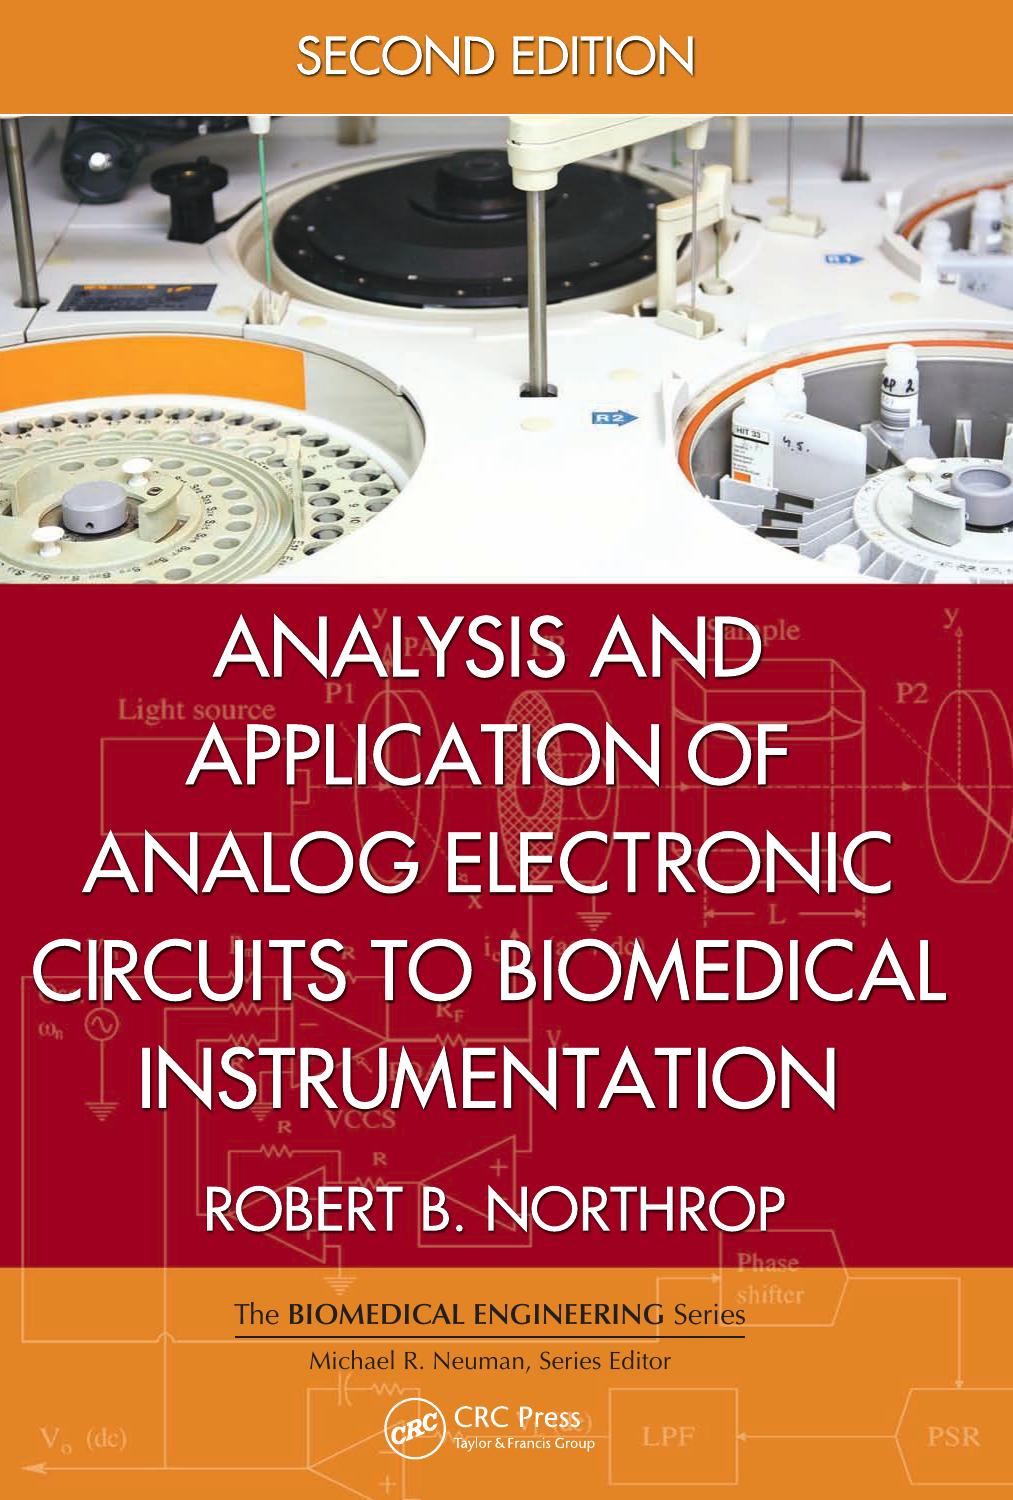 Analysis and application of analog electronic circuits to biomedical instrumentation